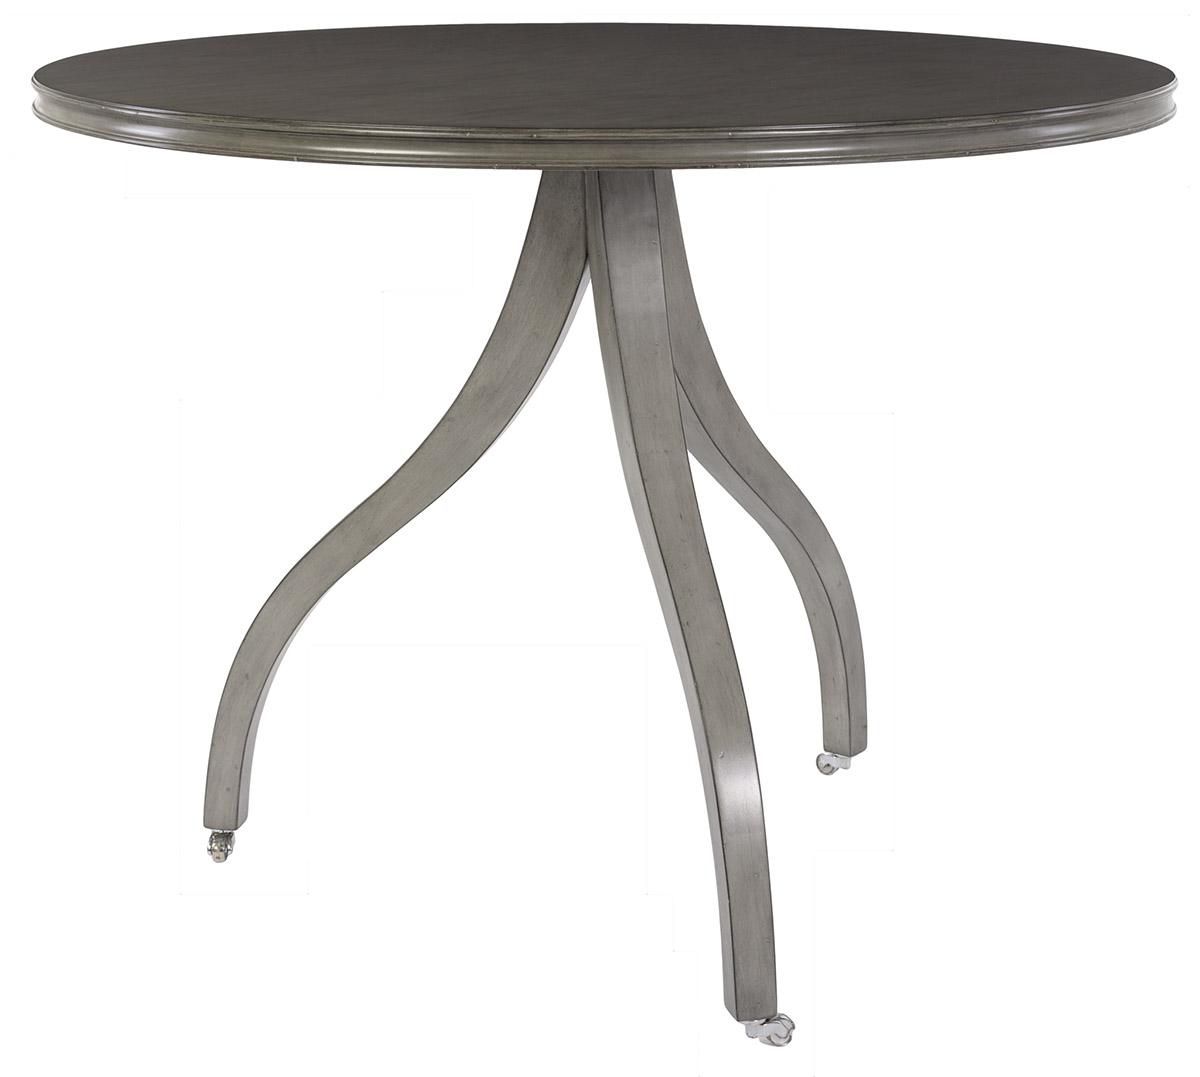 Distressed Grey Finish Wood Classic Design Dining Tables With Regard To Current Cosmopolitan Tripod Pedestal Round Dining Table – Safavieh (View 24 of 30)